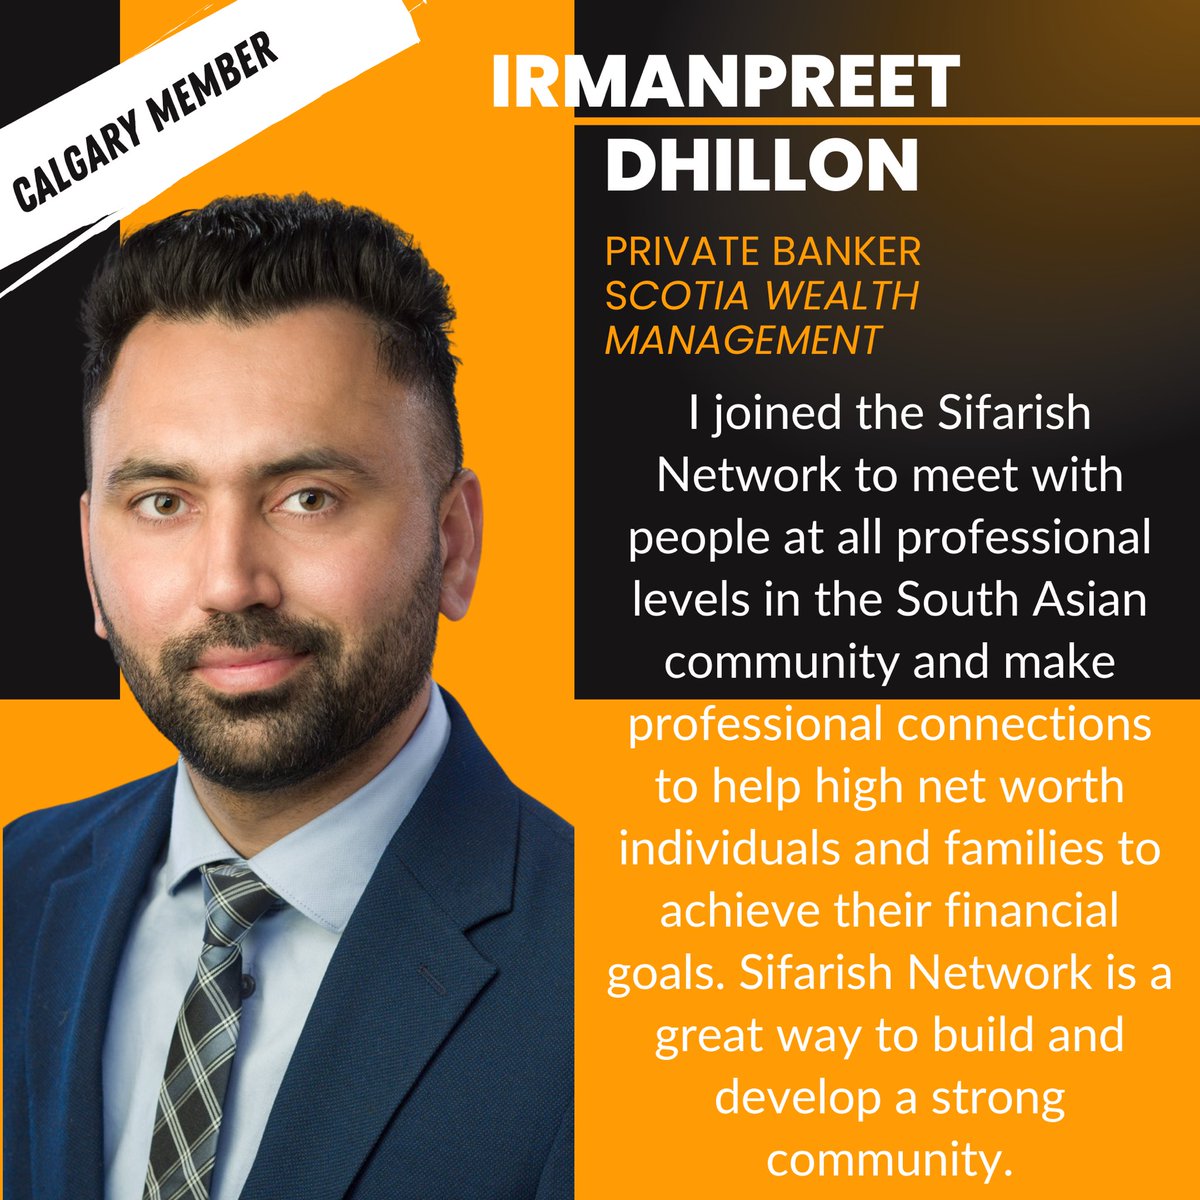 Welcome to this week’s #MembershipMonday ! This week, we feature Irmanpreet Dhillon!

#sifarish #community #connection #collaboration #southasian #business #yyc #yvr #canada #success #privatebanker #wealthmanagement #financialplanning #taxefficientsolutions #financialservices